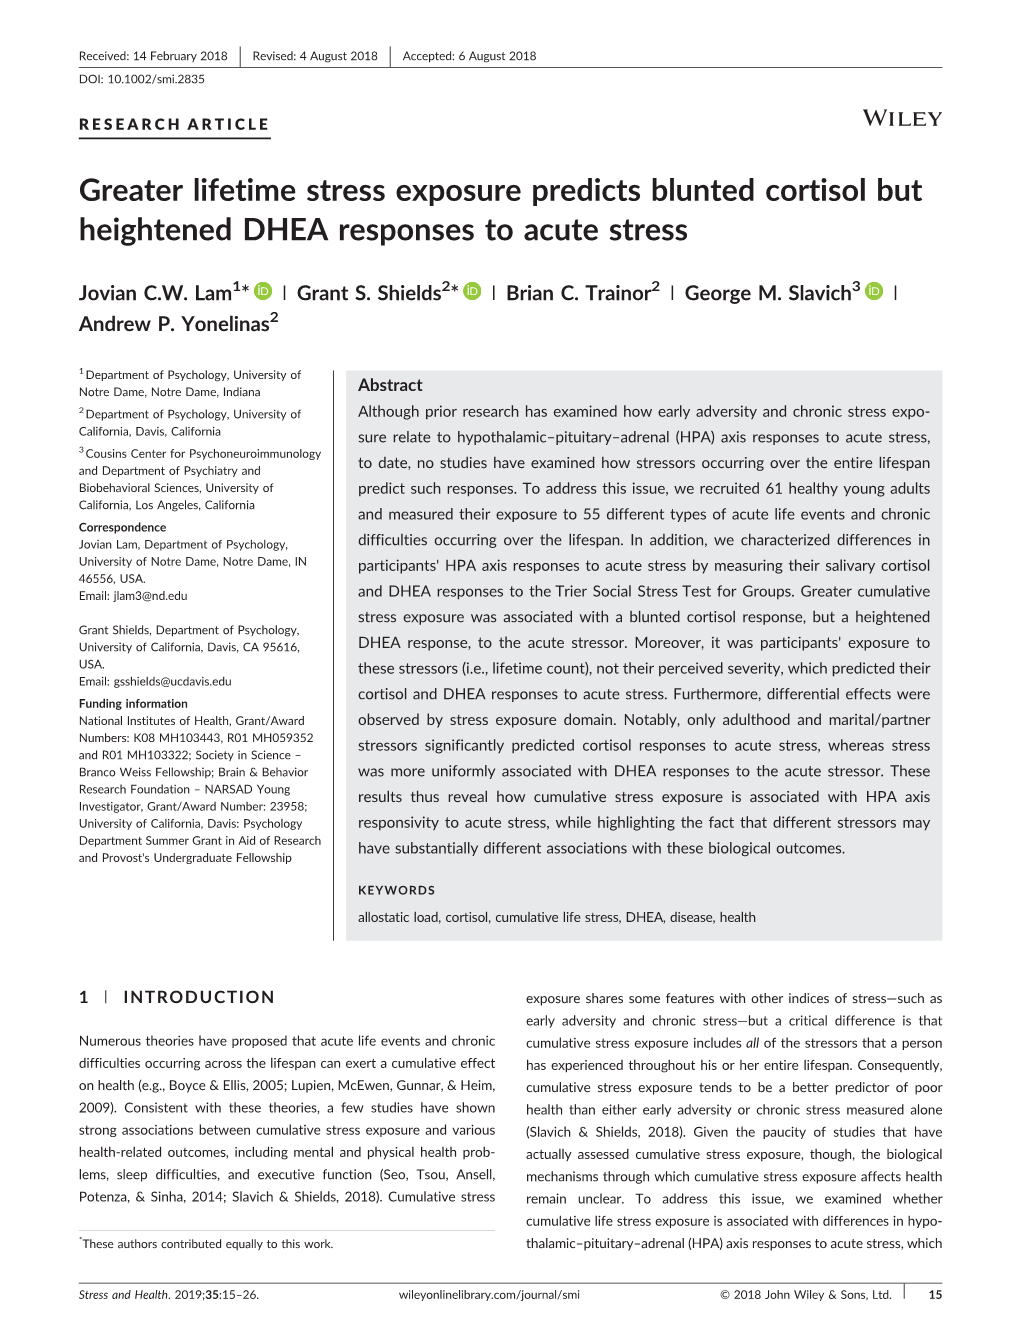 Greater Lifetime Stress Exposure Predicts Blunted Cortisol but Heightened DHEA Responses to Acute Stress